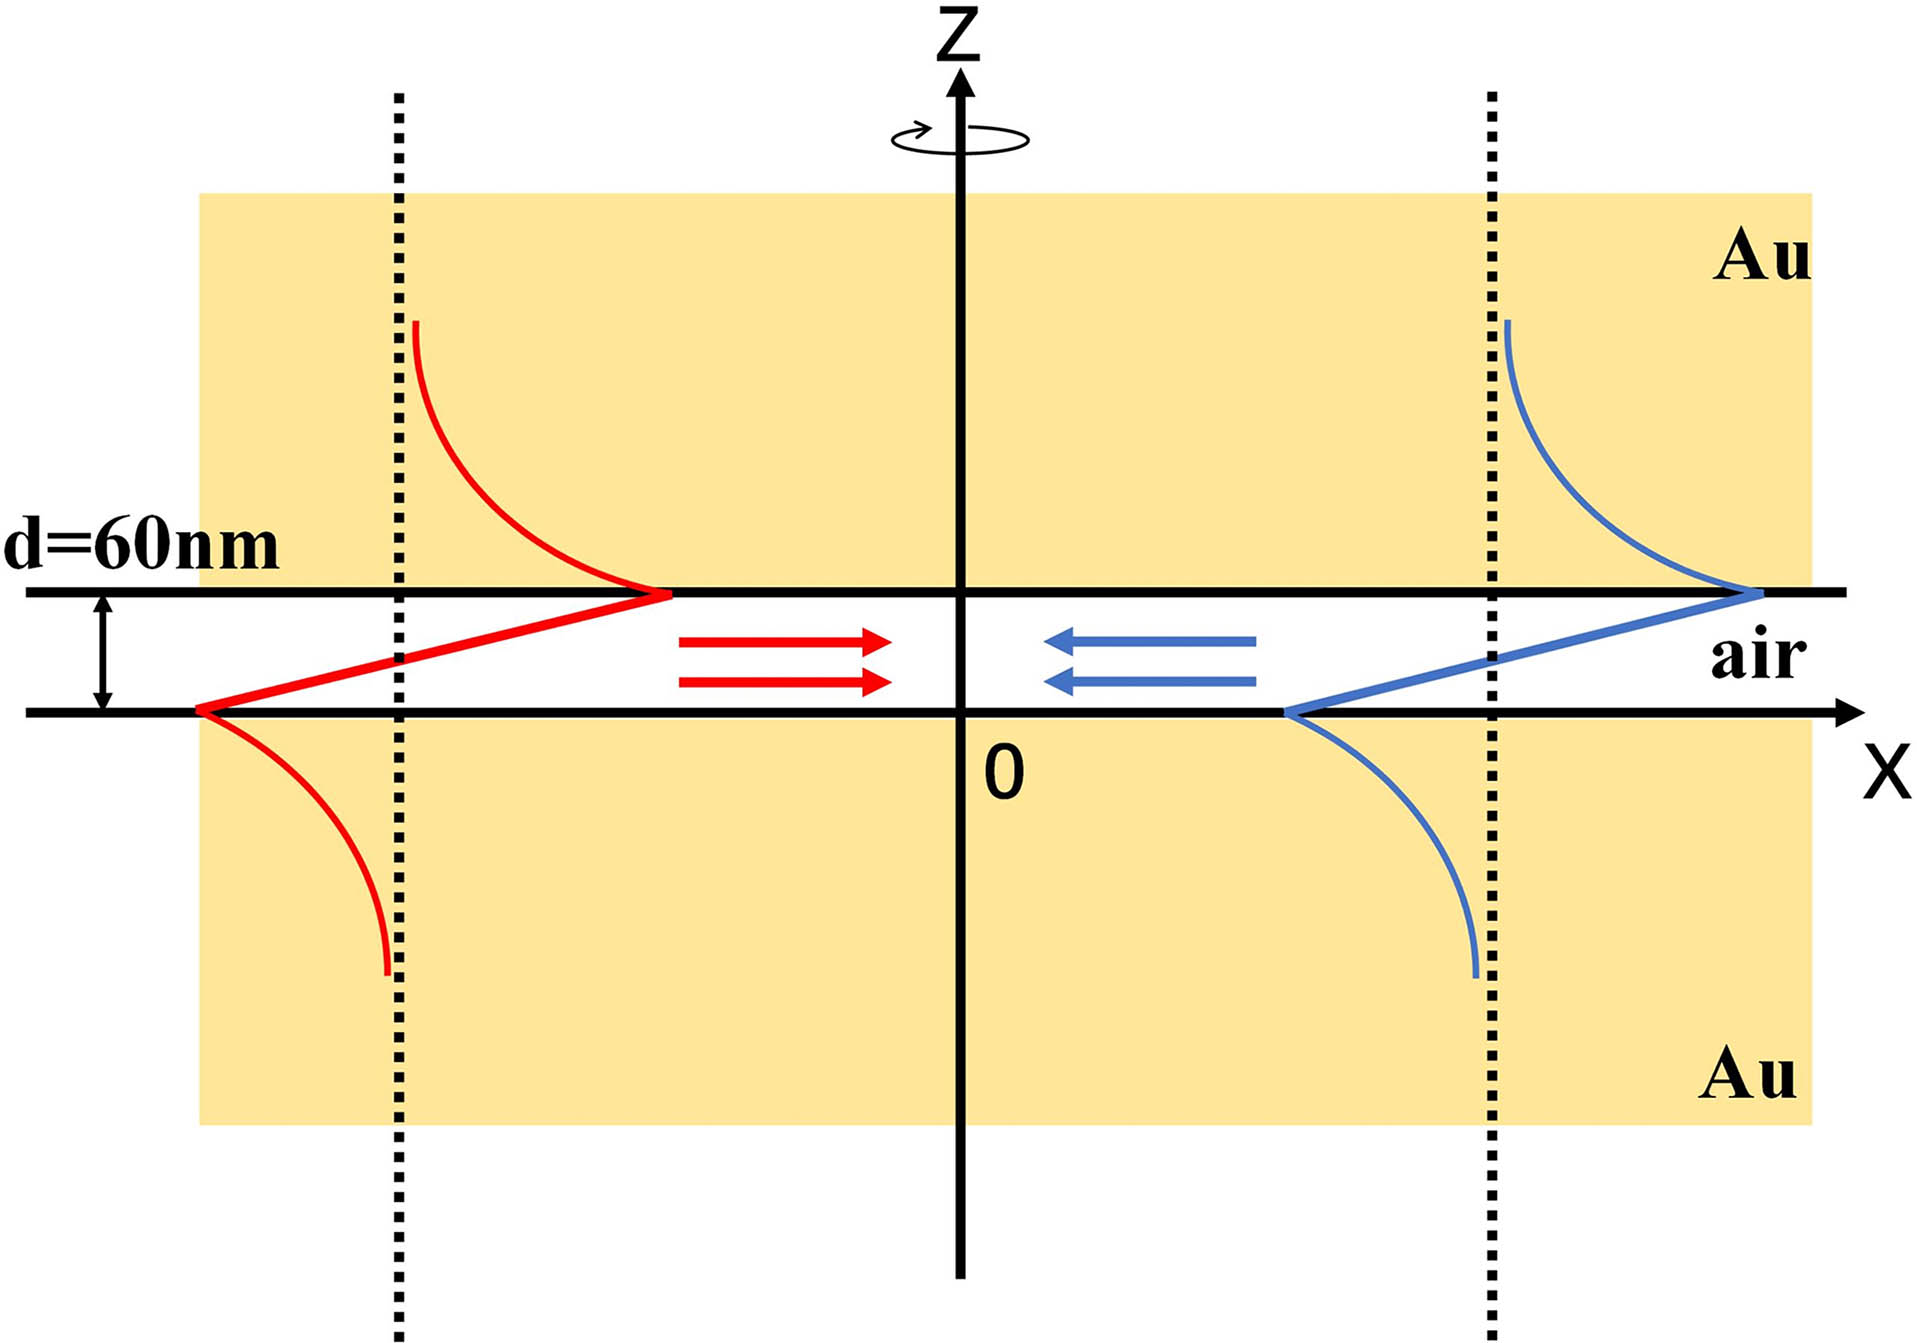 Schematic diagram of MIM structure, which consists of the gold cladding layers and the air gap as the core layer. The dielectric constants of gold and air are εAu = 12.997 + 1.0341i and ε0 = 1, respectively. The thickness of the air gap is d = 60 nm. The plasmonic modes propagate towards the origin from all spatial directions to create the superchiral field.